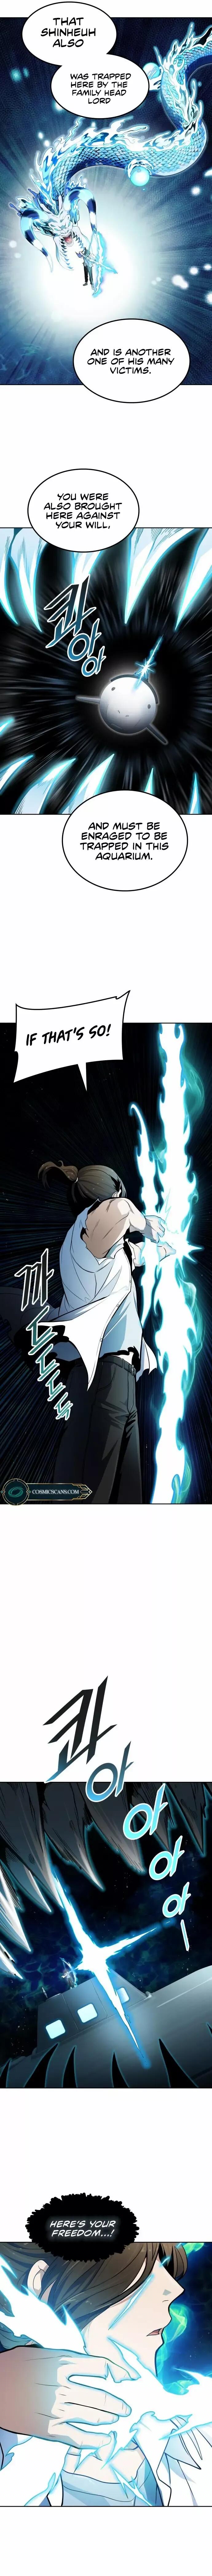 Tower Of God Chapter 576 Read Tower Of God Chapter 576 - Manganelo